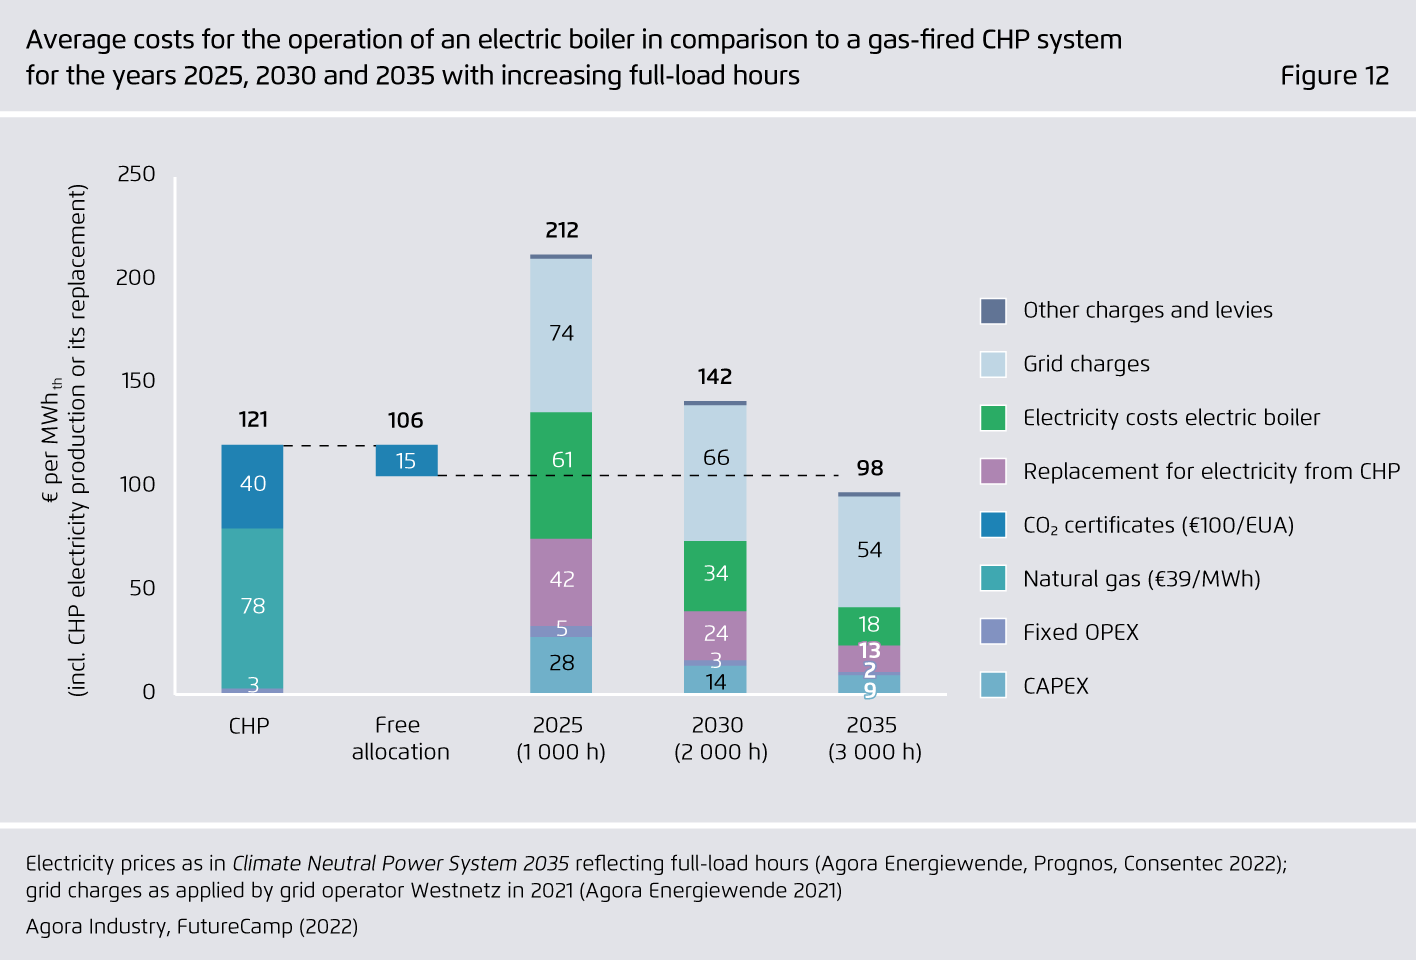 Preview for Average costs for the operation of an electric boiler in comparison to a gas-fired CHP system for the years 2025, 2030 and 2035 with increasing full-load hours